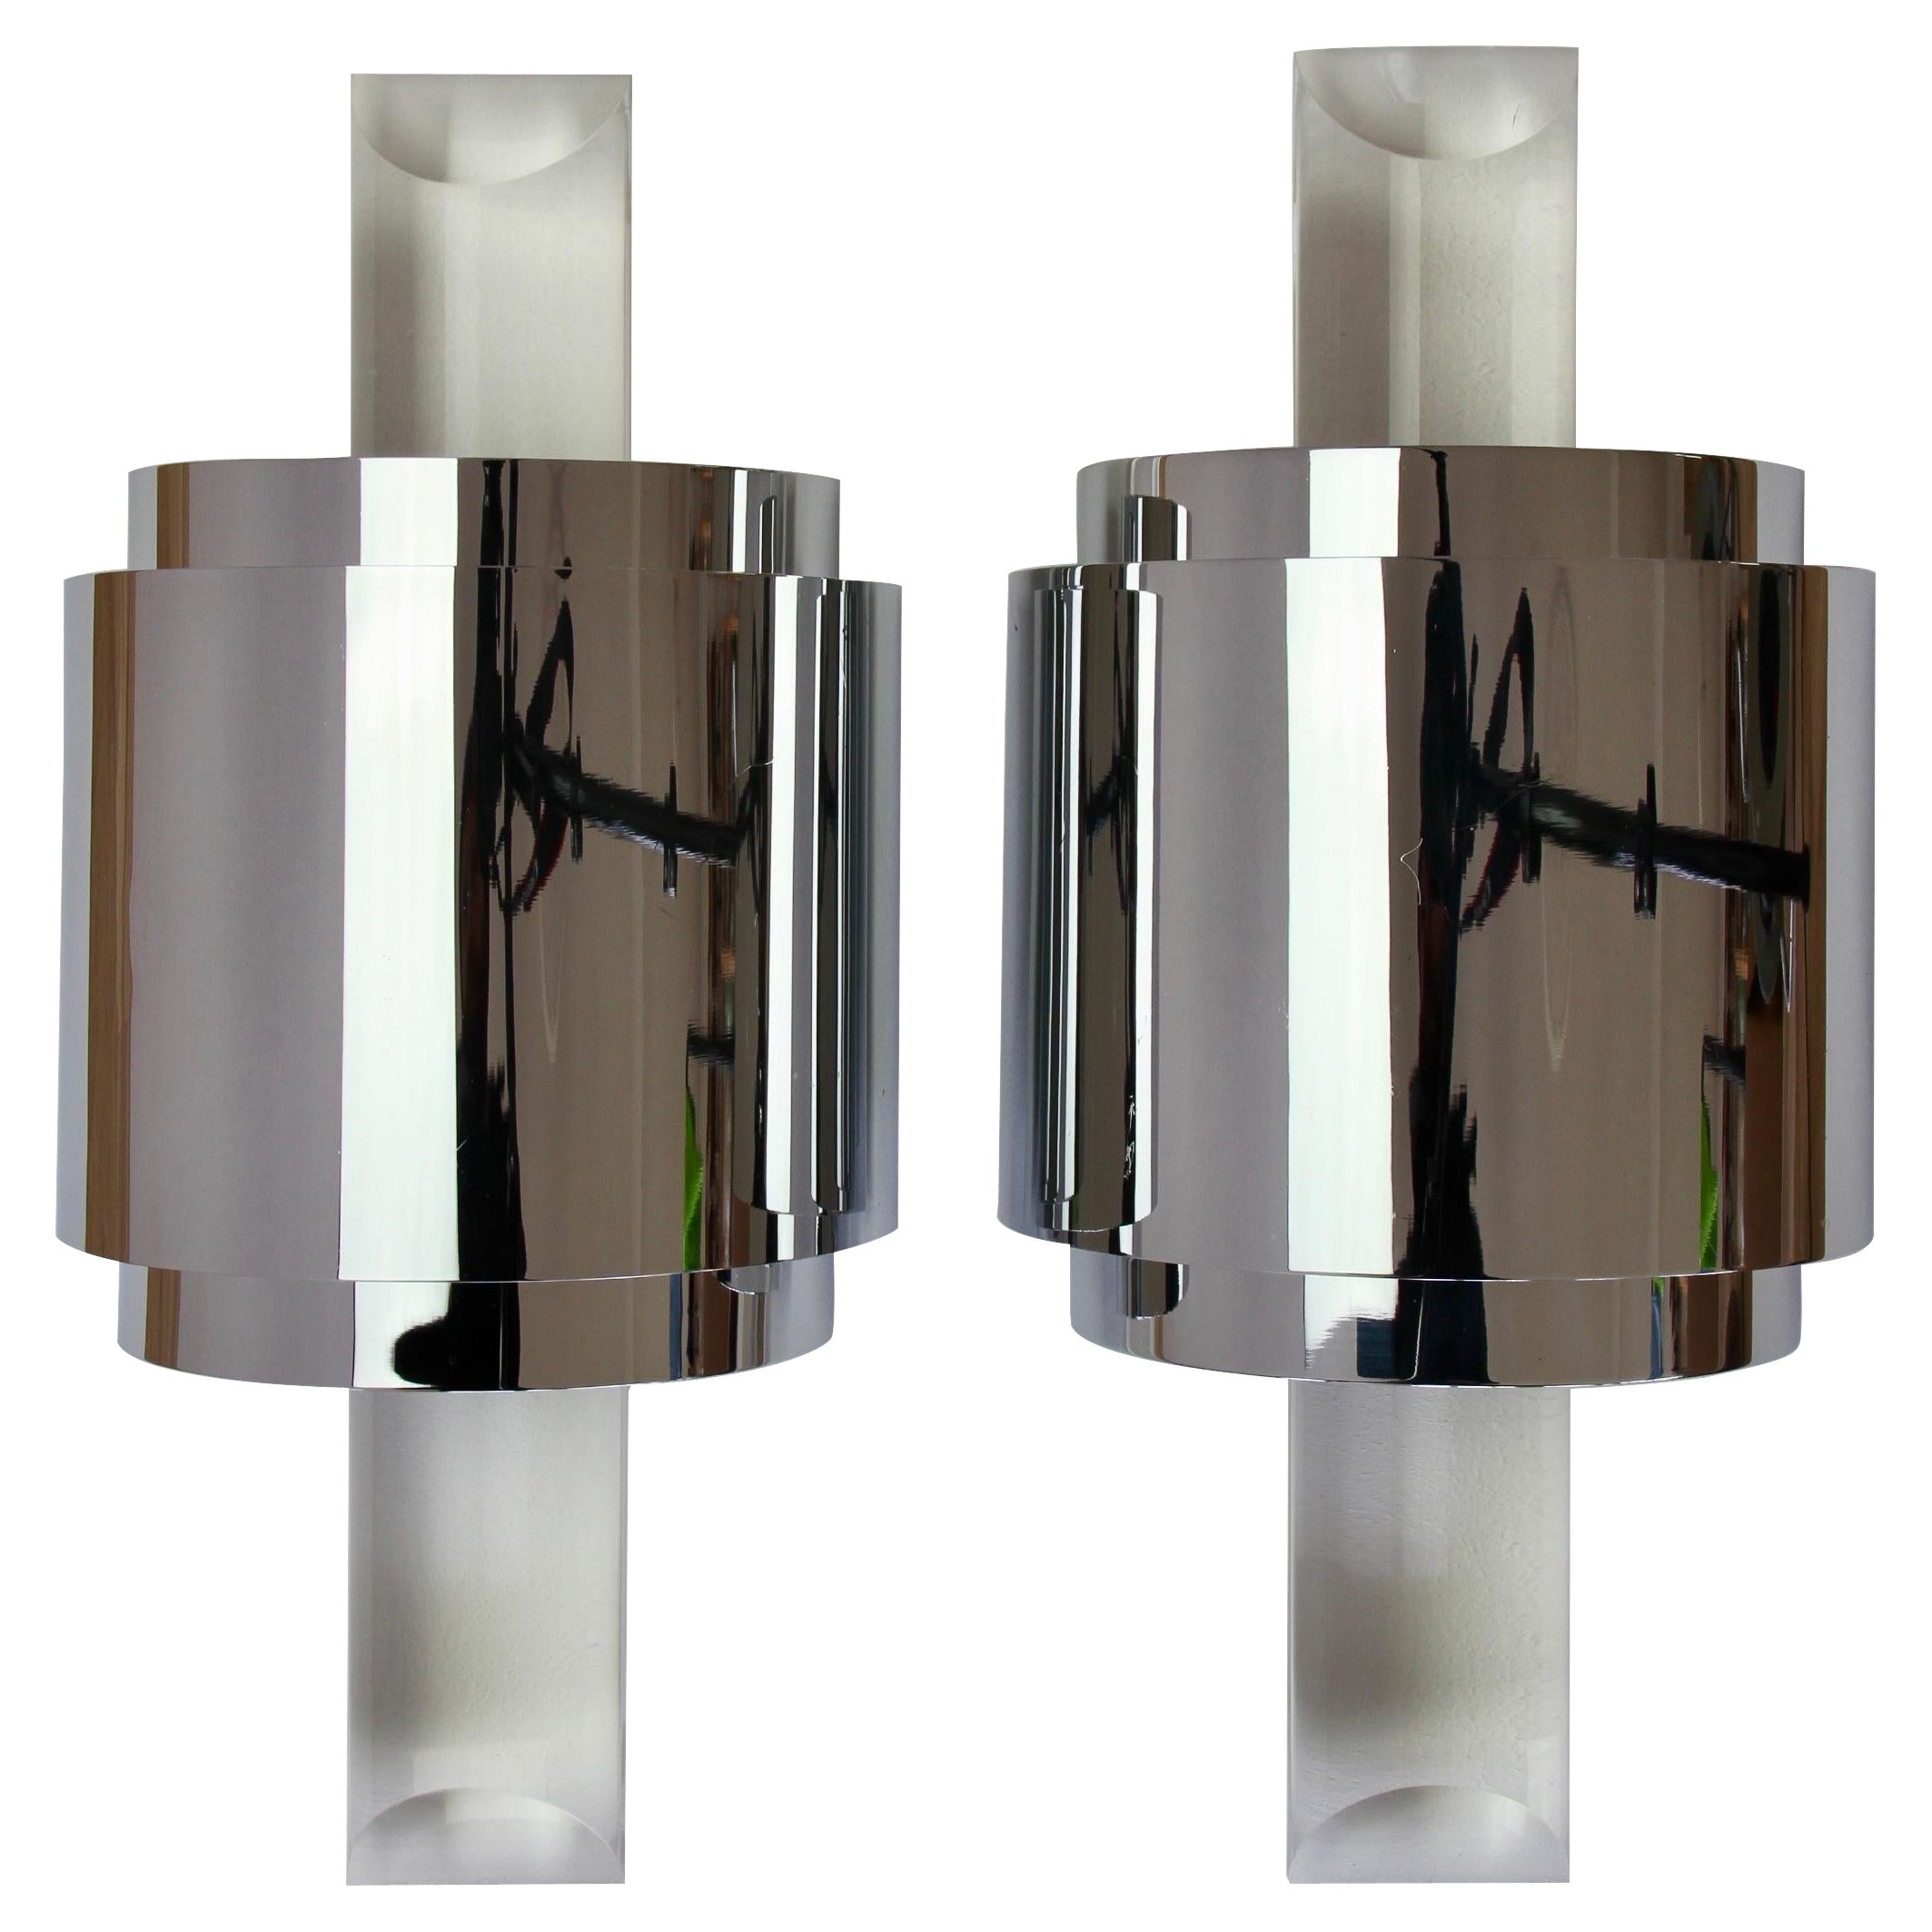 Large Hollywood Regency Lucite and Chrome Wall Lights or Sconces, circa 1970s For Sale